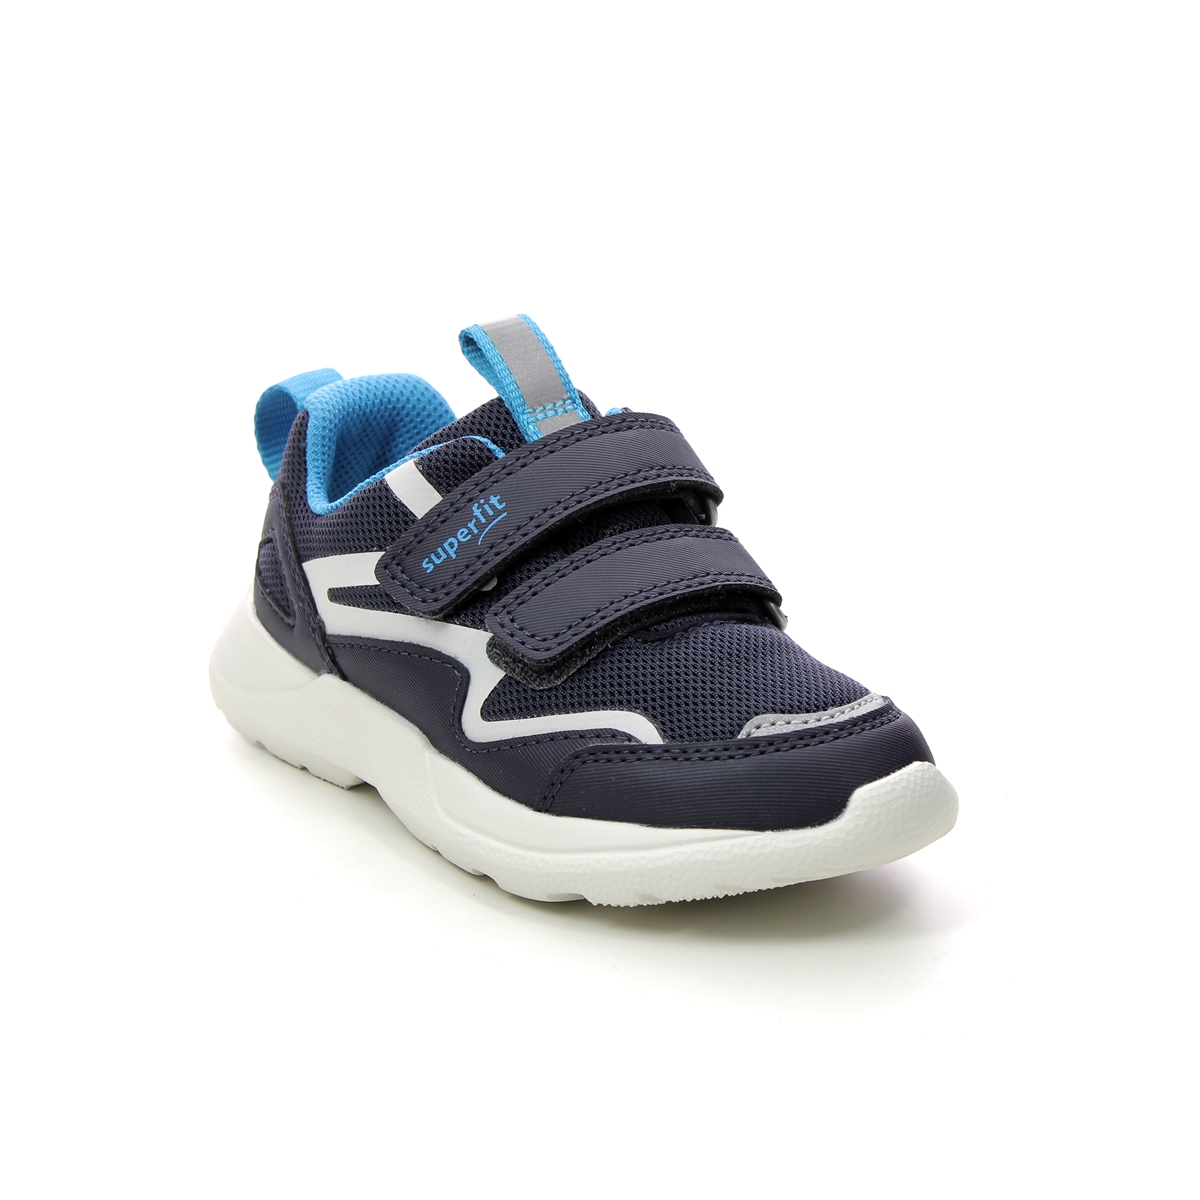 Superfit Rush Mini Navy Kids Trainers 1006206-8000 In Size 25 In Plain Navy For kids